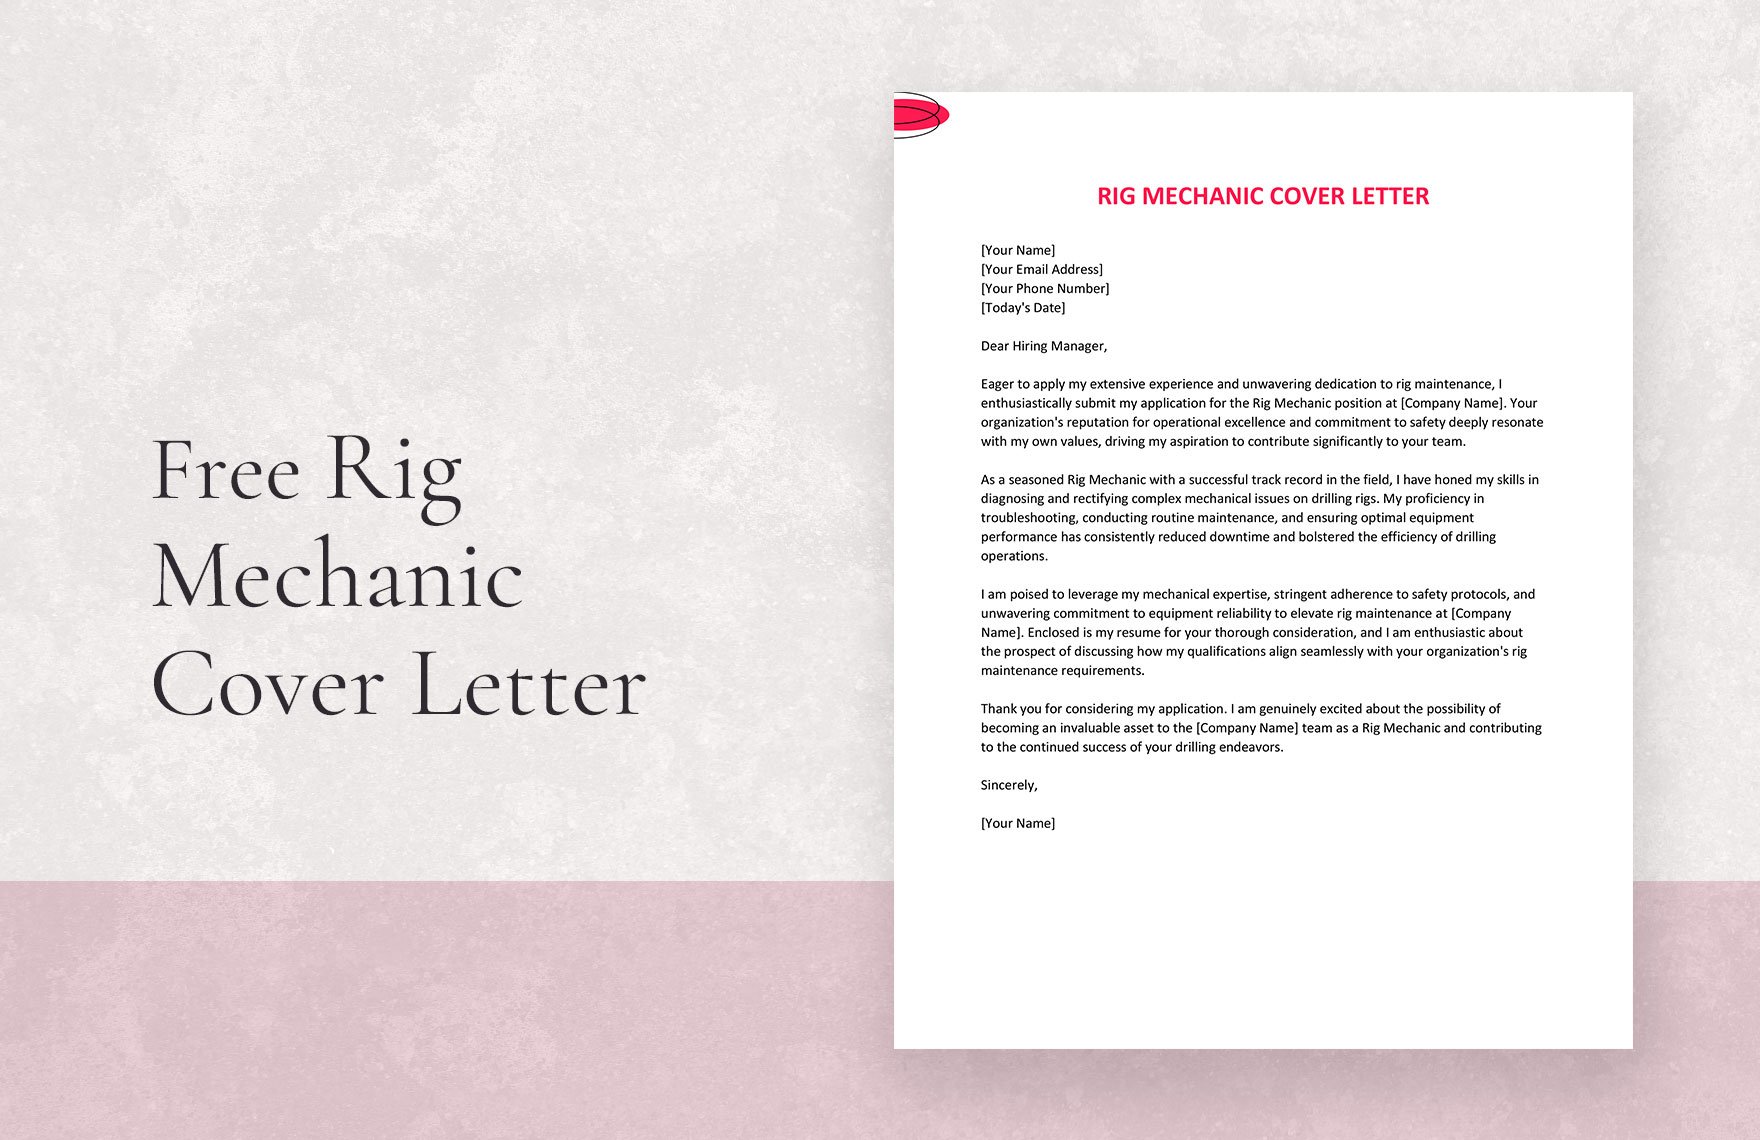 Rig Mechanic Cover Letter in Word, Google Docs